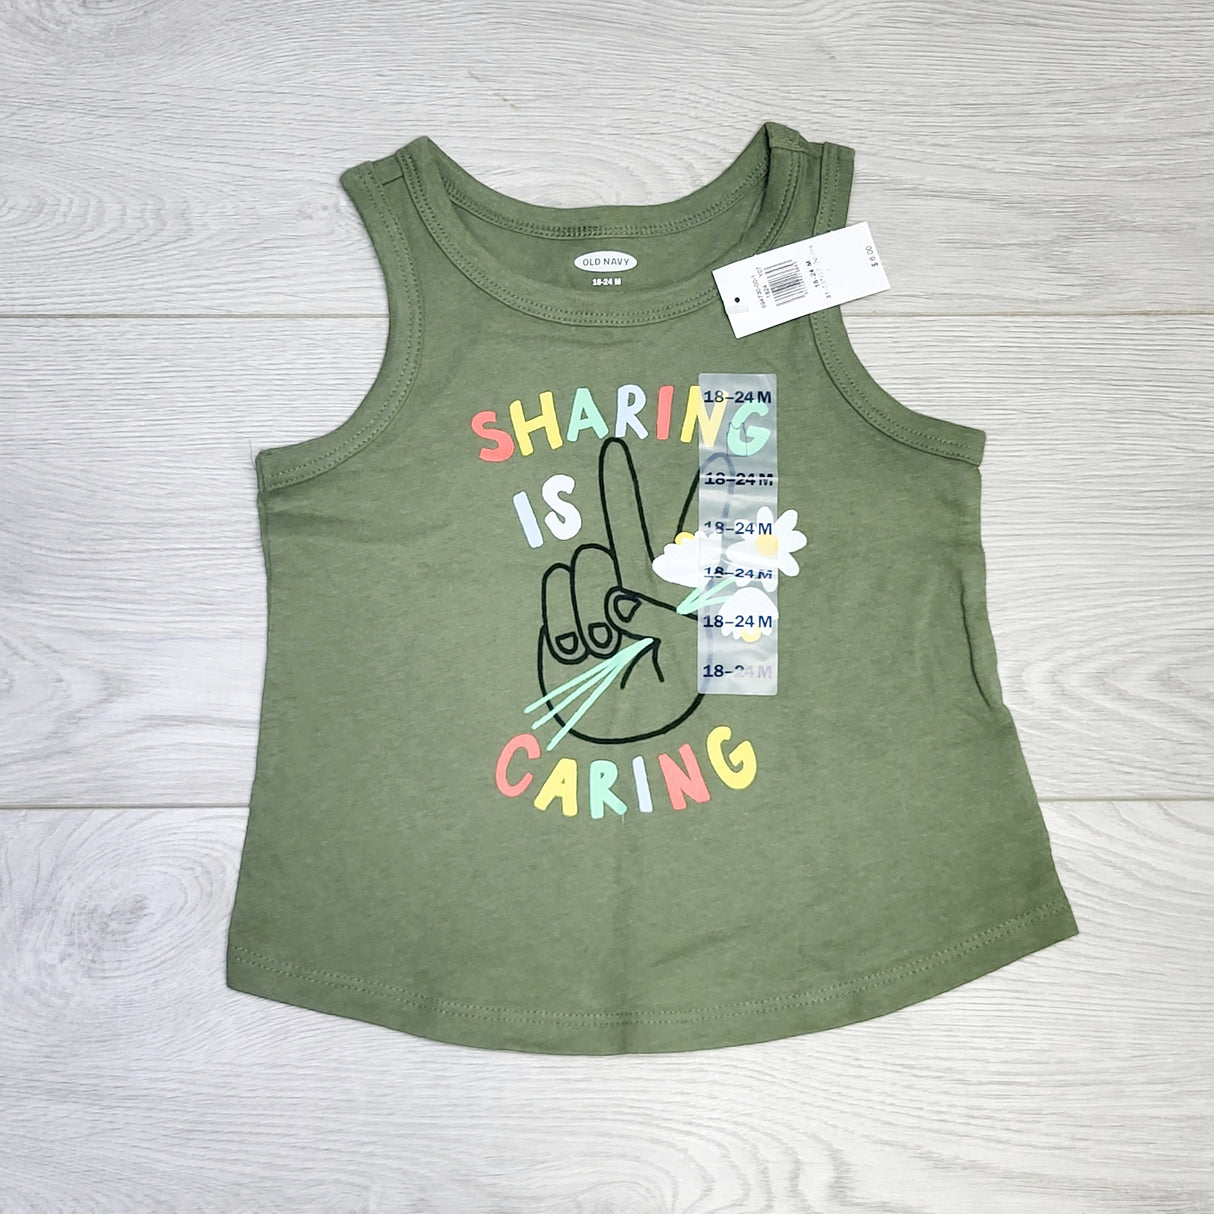 CRTH1 - NEW - Old Navy green "Sharing is Caring" tank top. Size 18-24 months